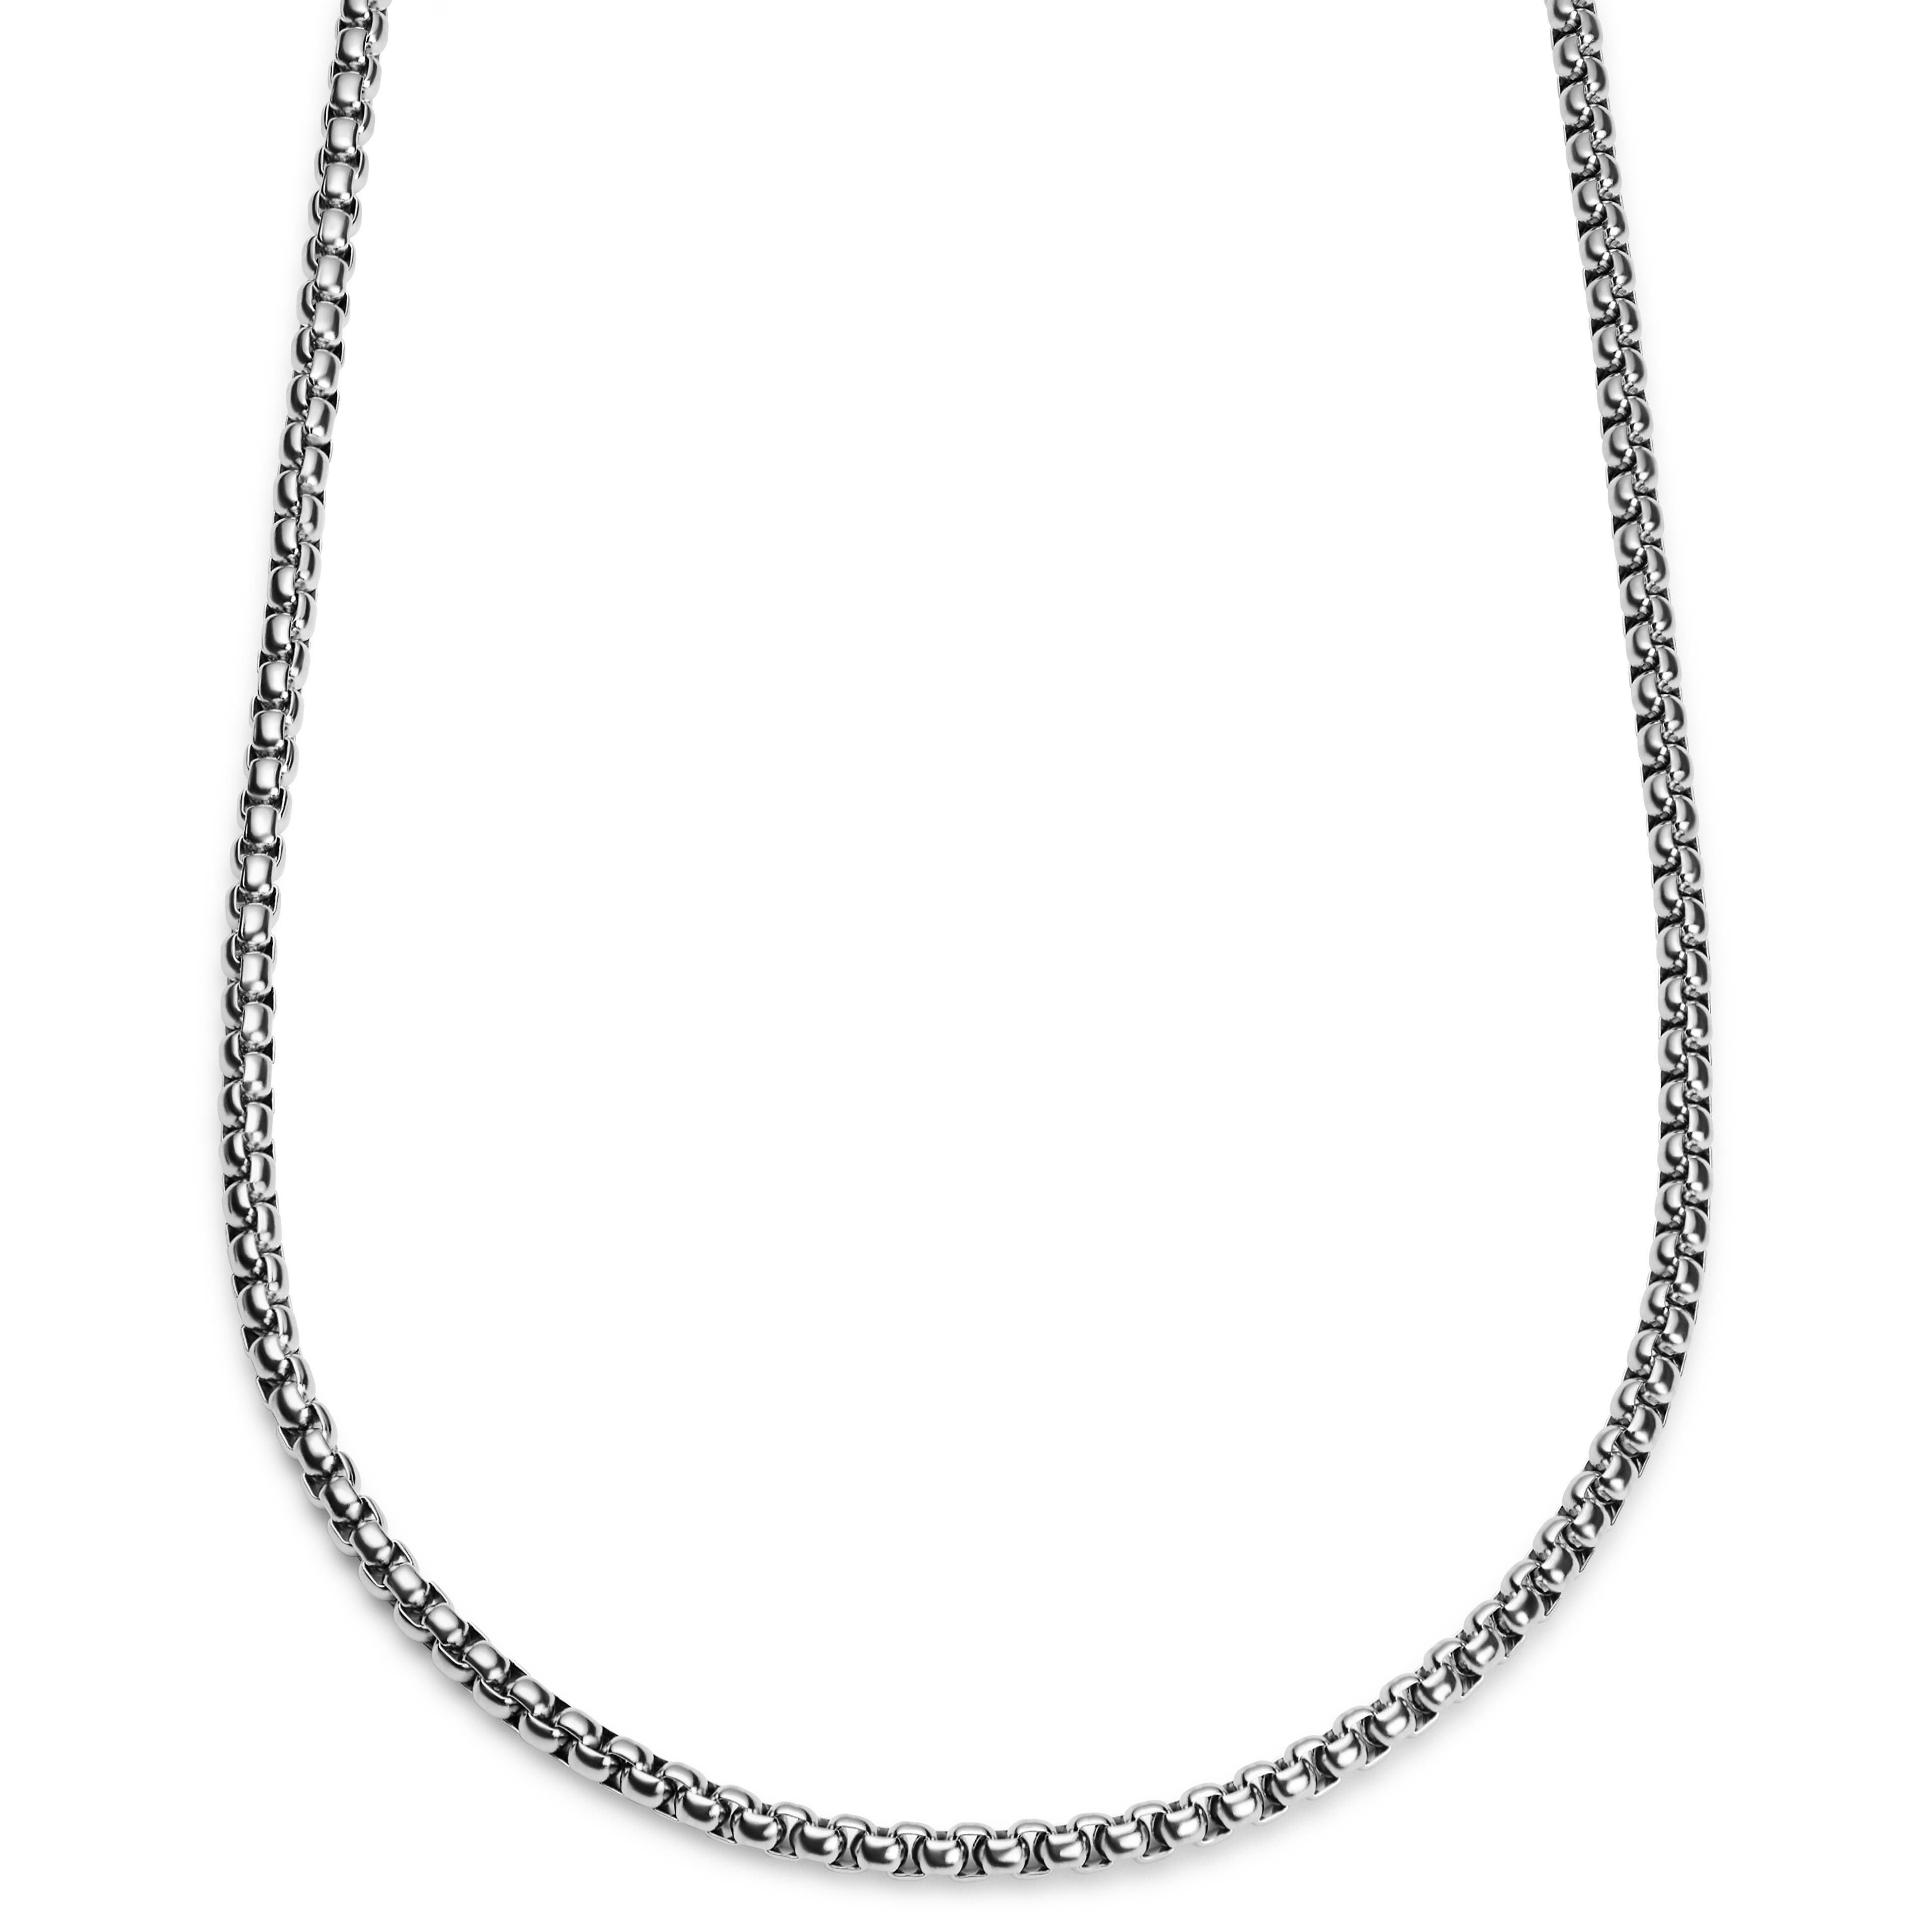 Essentials | 1/5" (5 mm) Silver-Tone Curved Box Chain Necklace